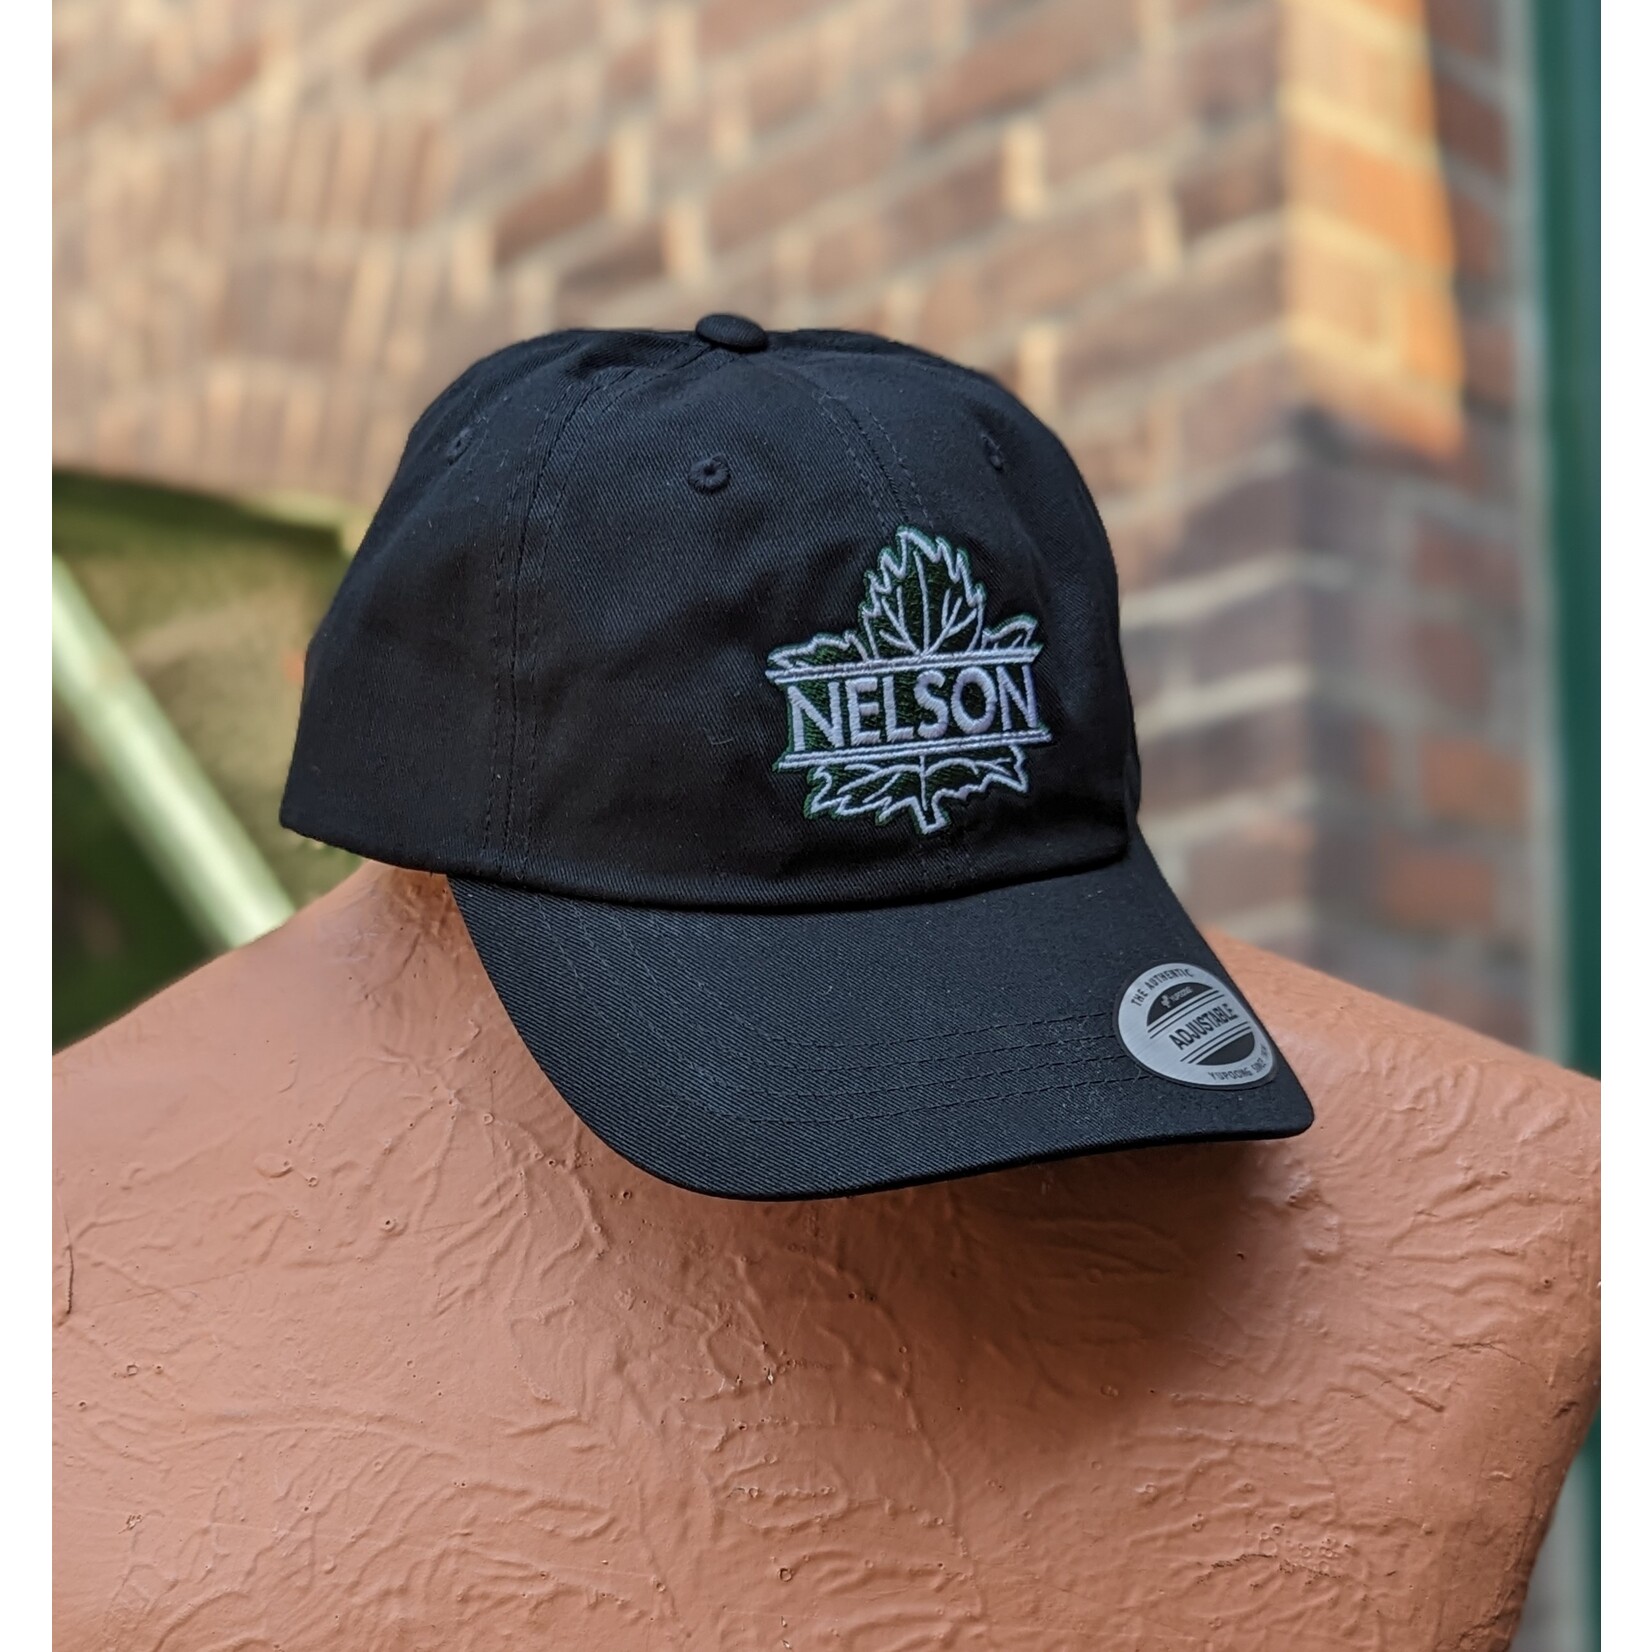 Nelson Leafs 6245 Adjustable Twill Cap - 5 Colours